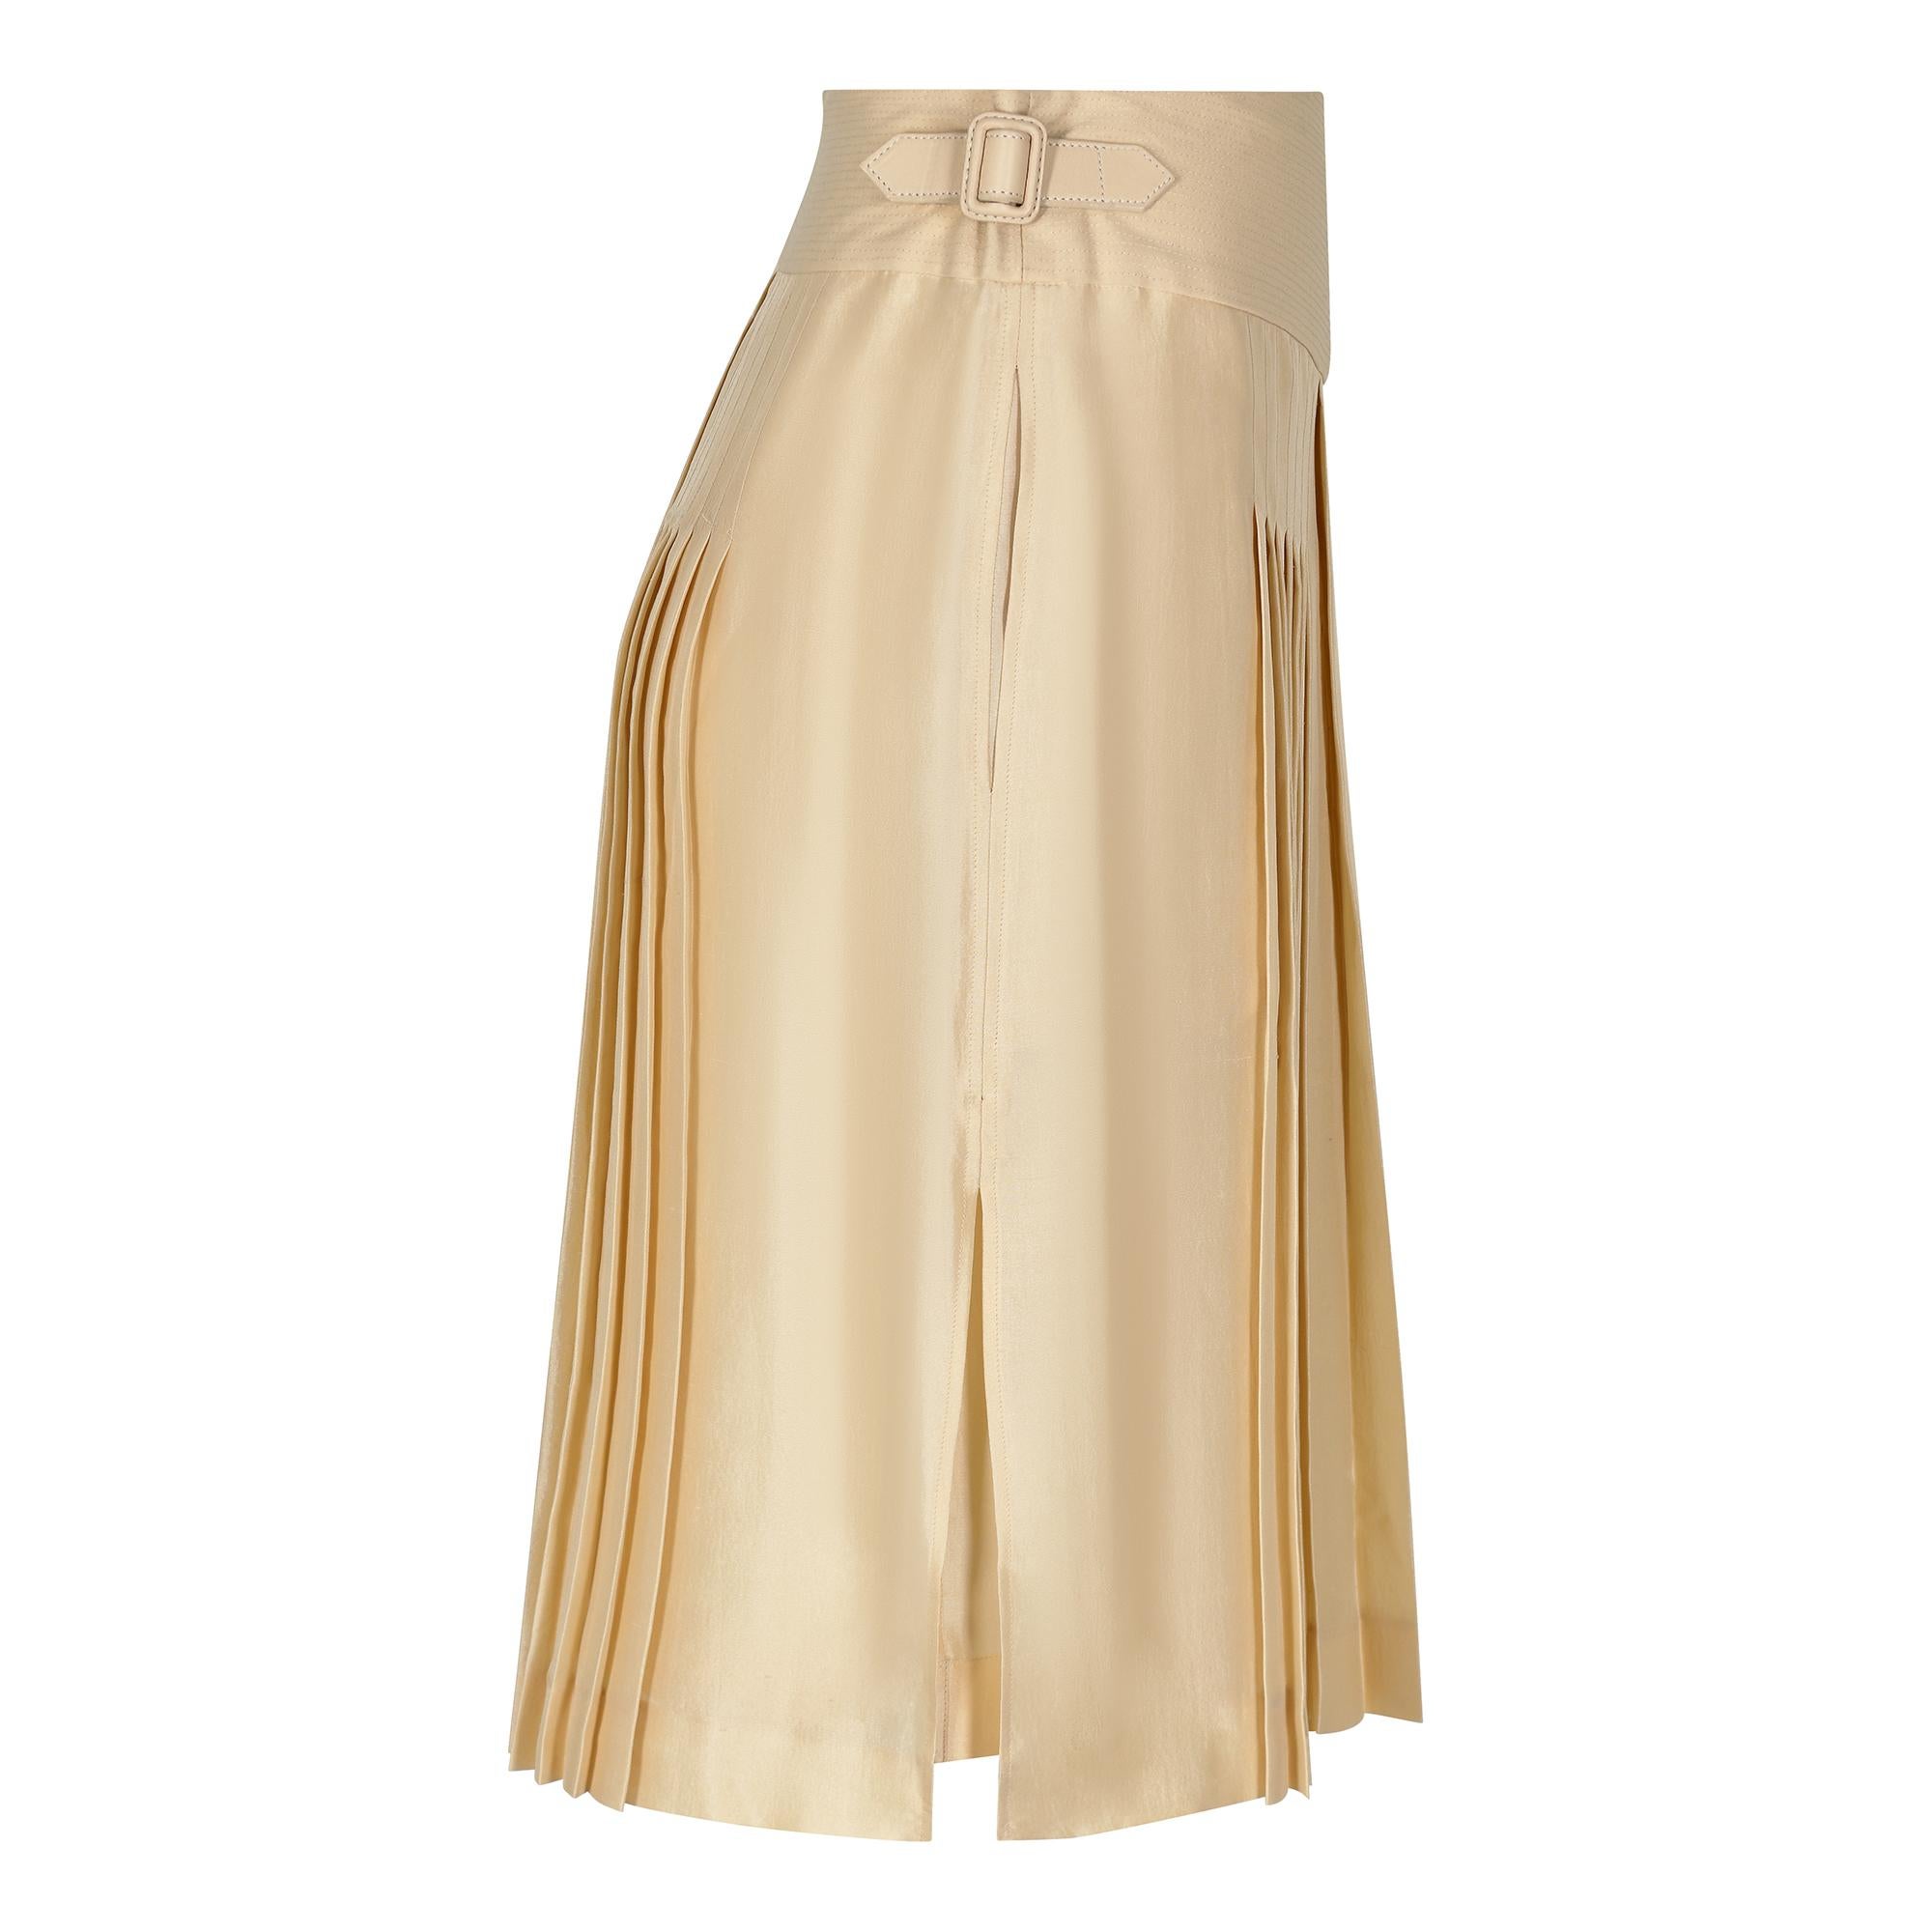 This is a brand new with tags Hermes natural silk and leather accordion pleat skirt. This is an absolutely classic style that will never date although this piece is new 'old stock'. It is extremely wearable and versatile. The skirt features a